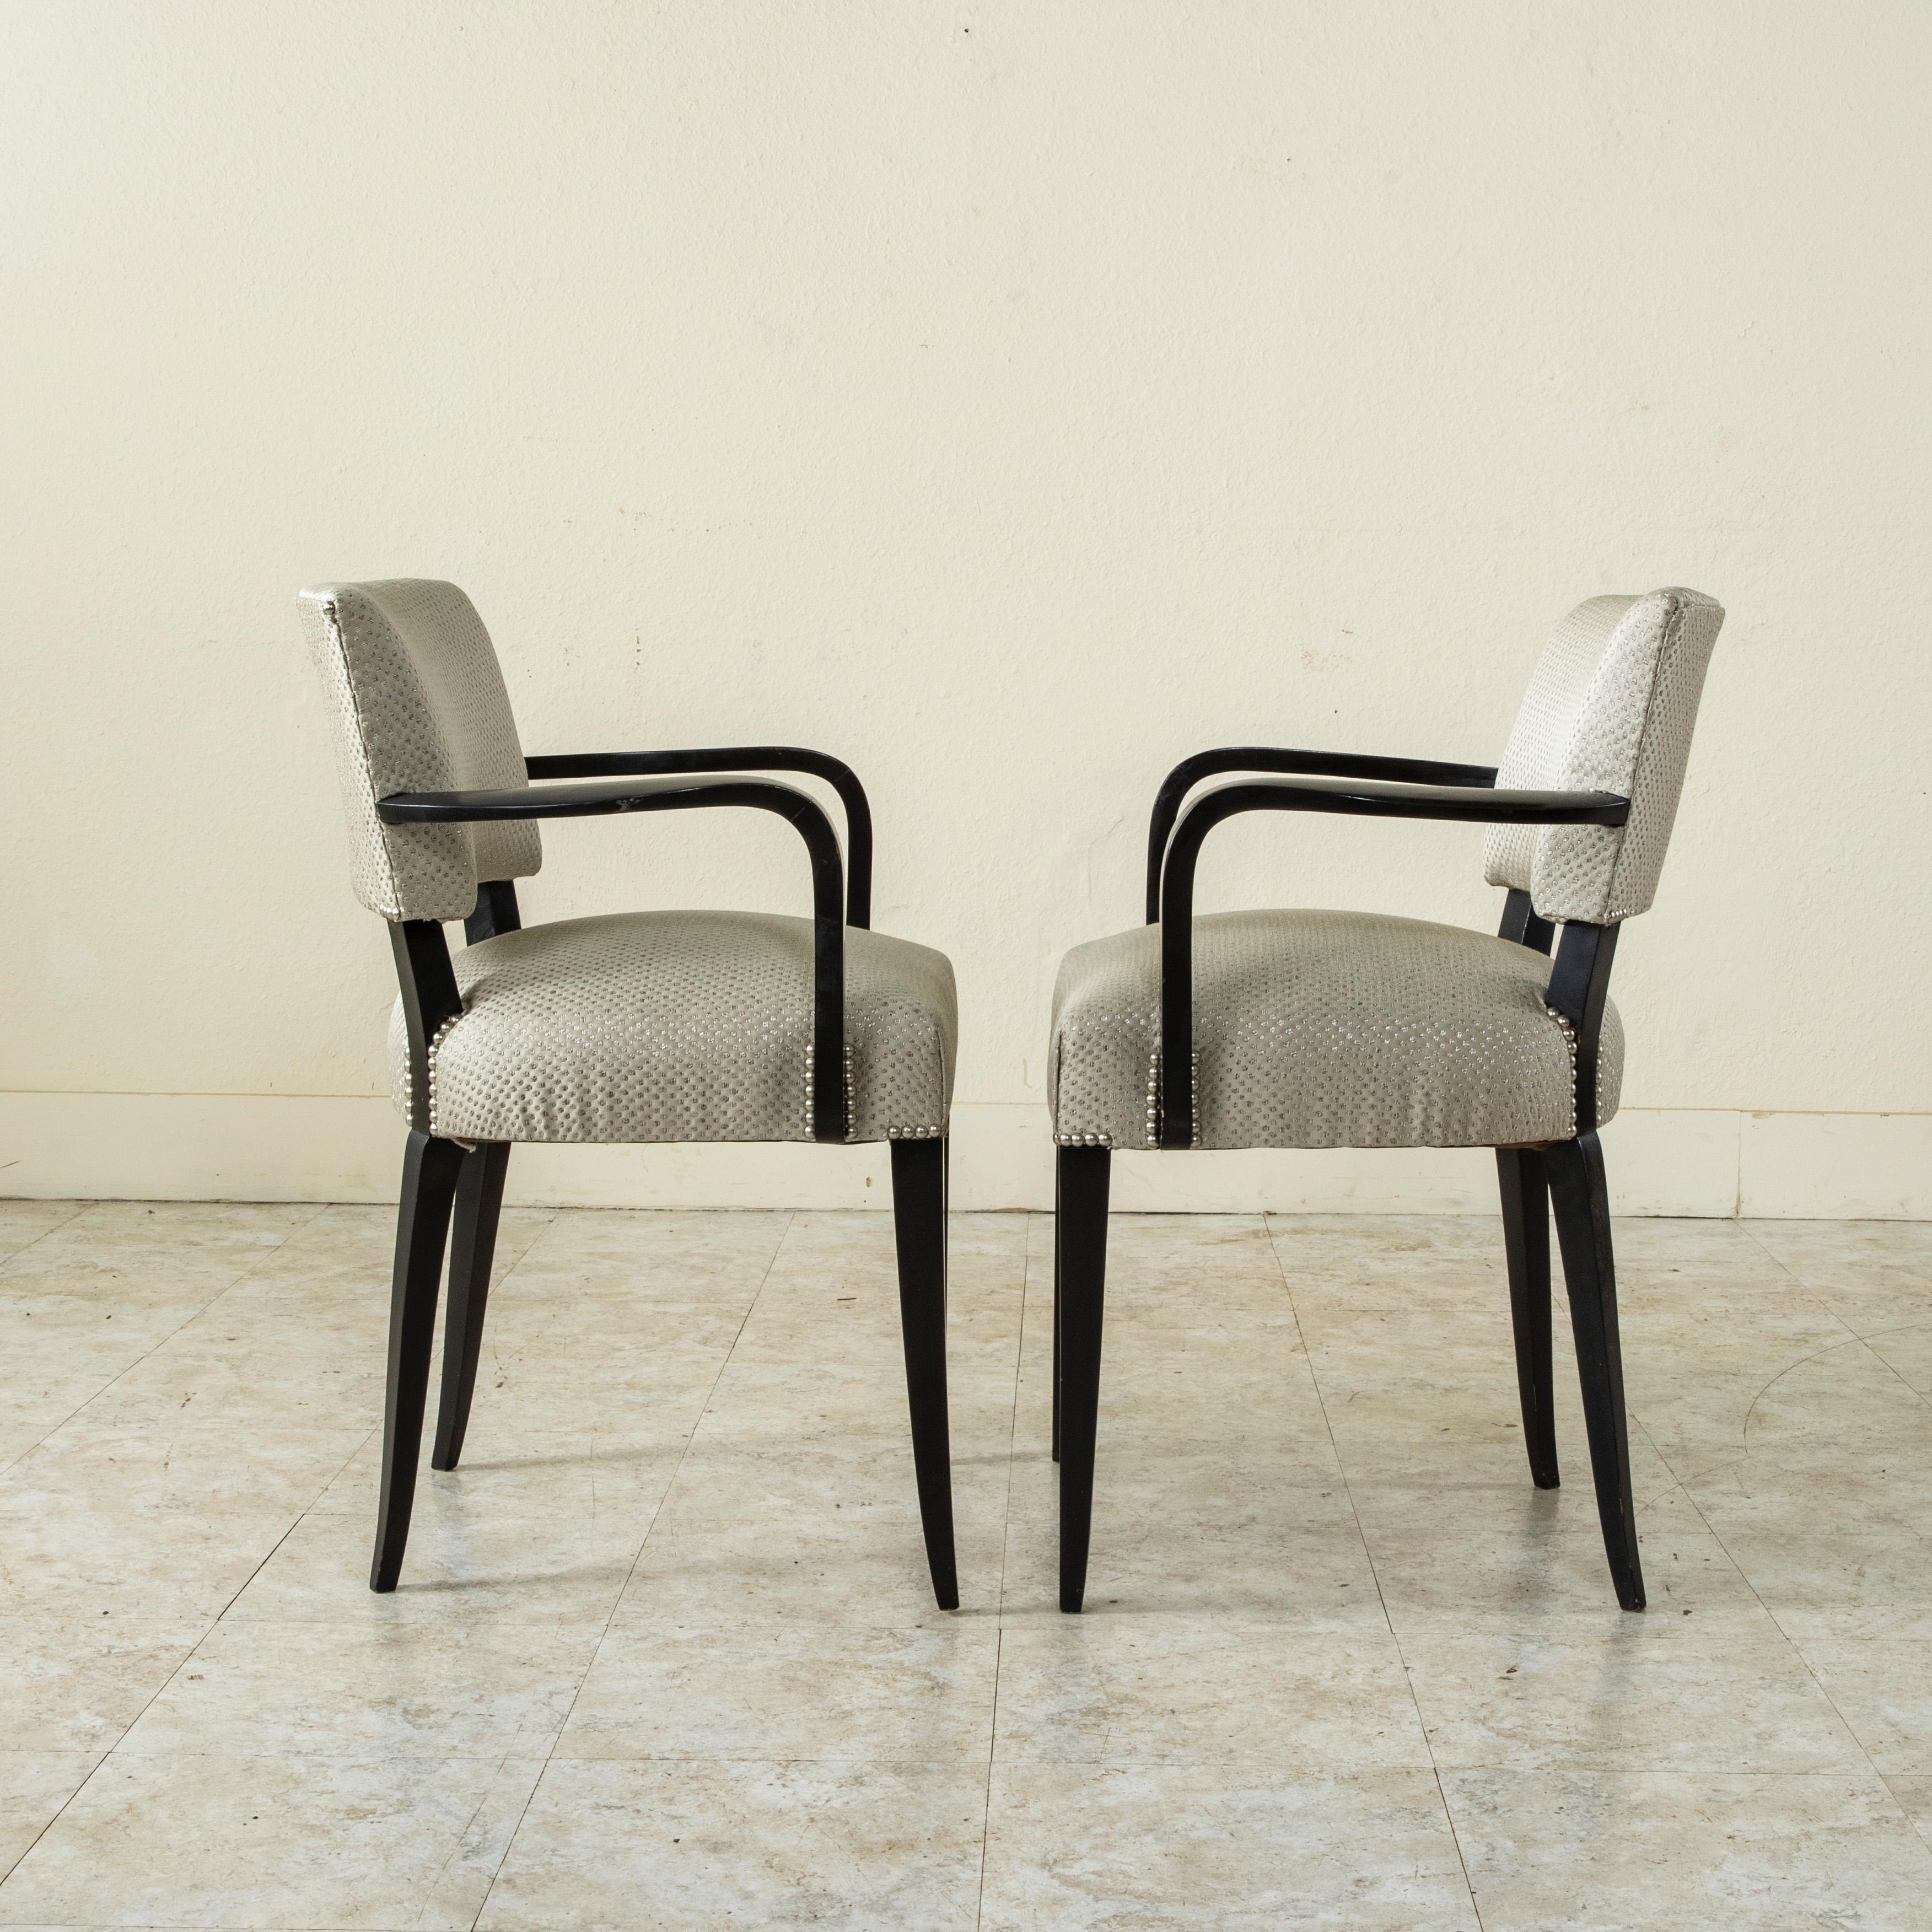 Ash Mid-20th Century French Black Lacquer Bridge Chairs with Nail Head Trim For Sale